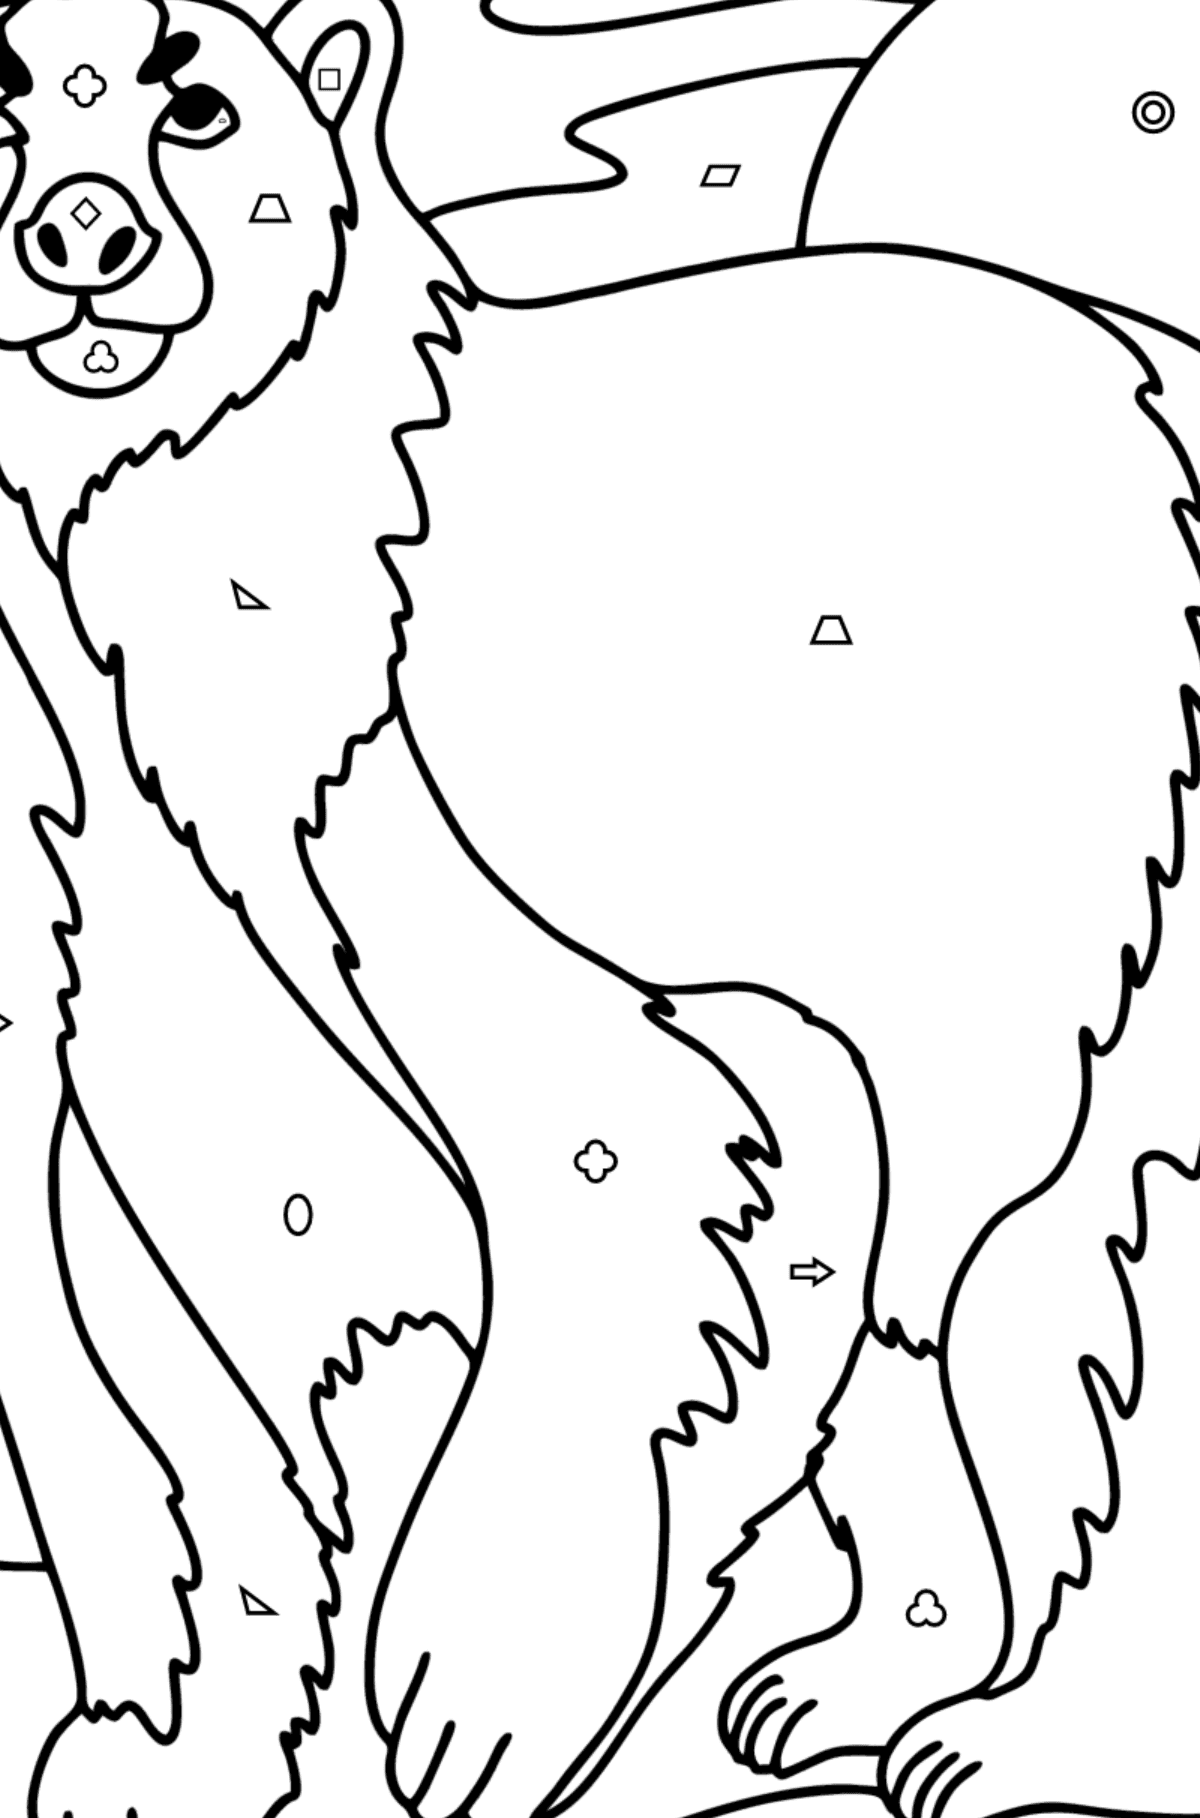 Polar bear coloring page - Coloring by Geometric Shapes for Kids